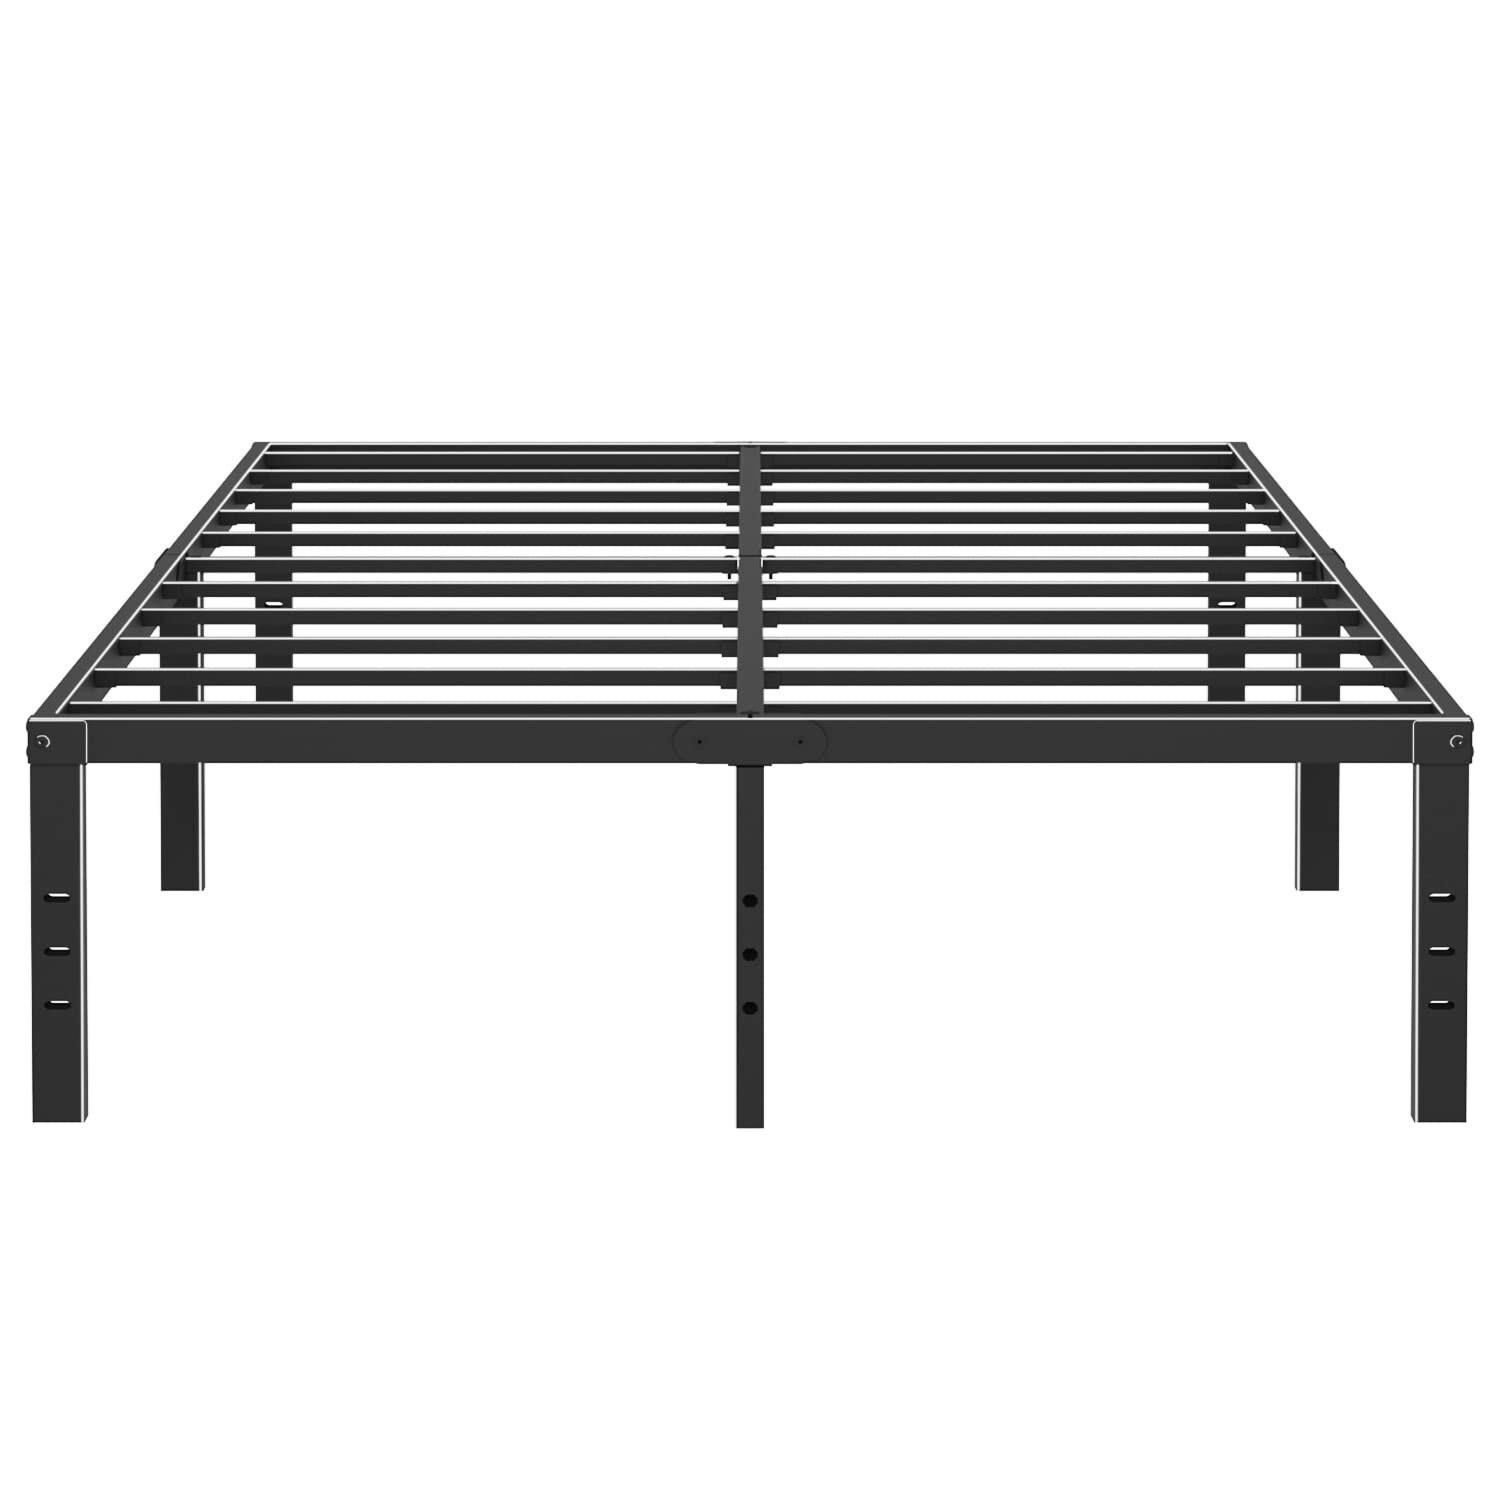 Rooflare Queen Bed Frame 14 Inch High 9 Legs Max 3